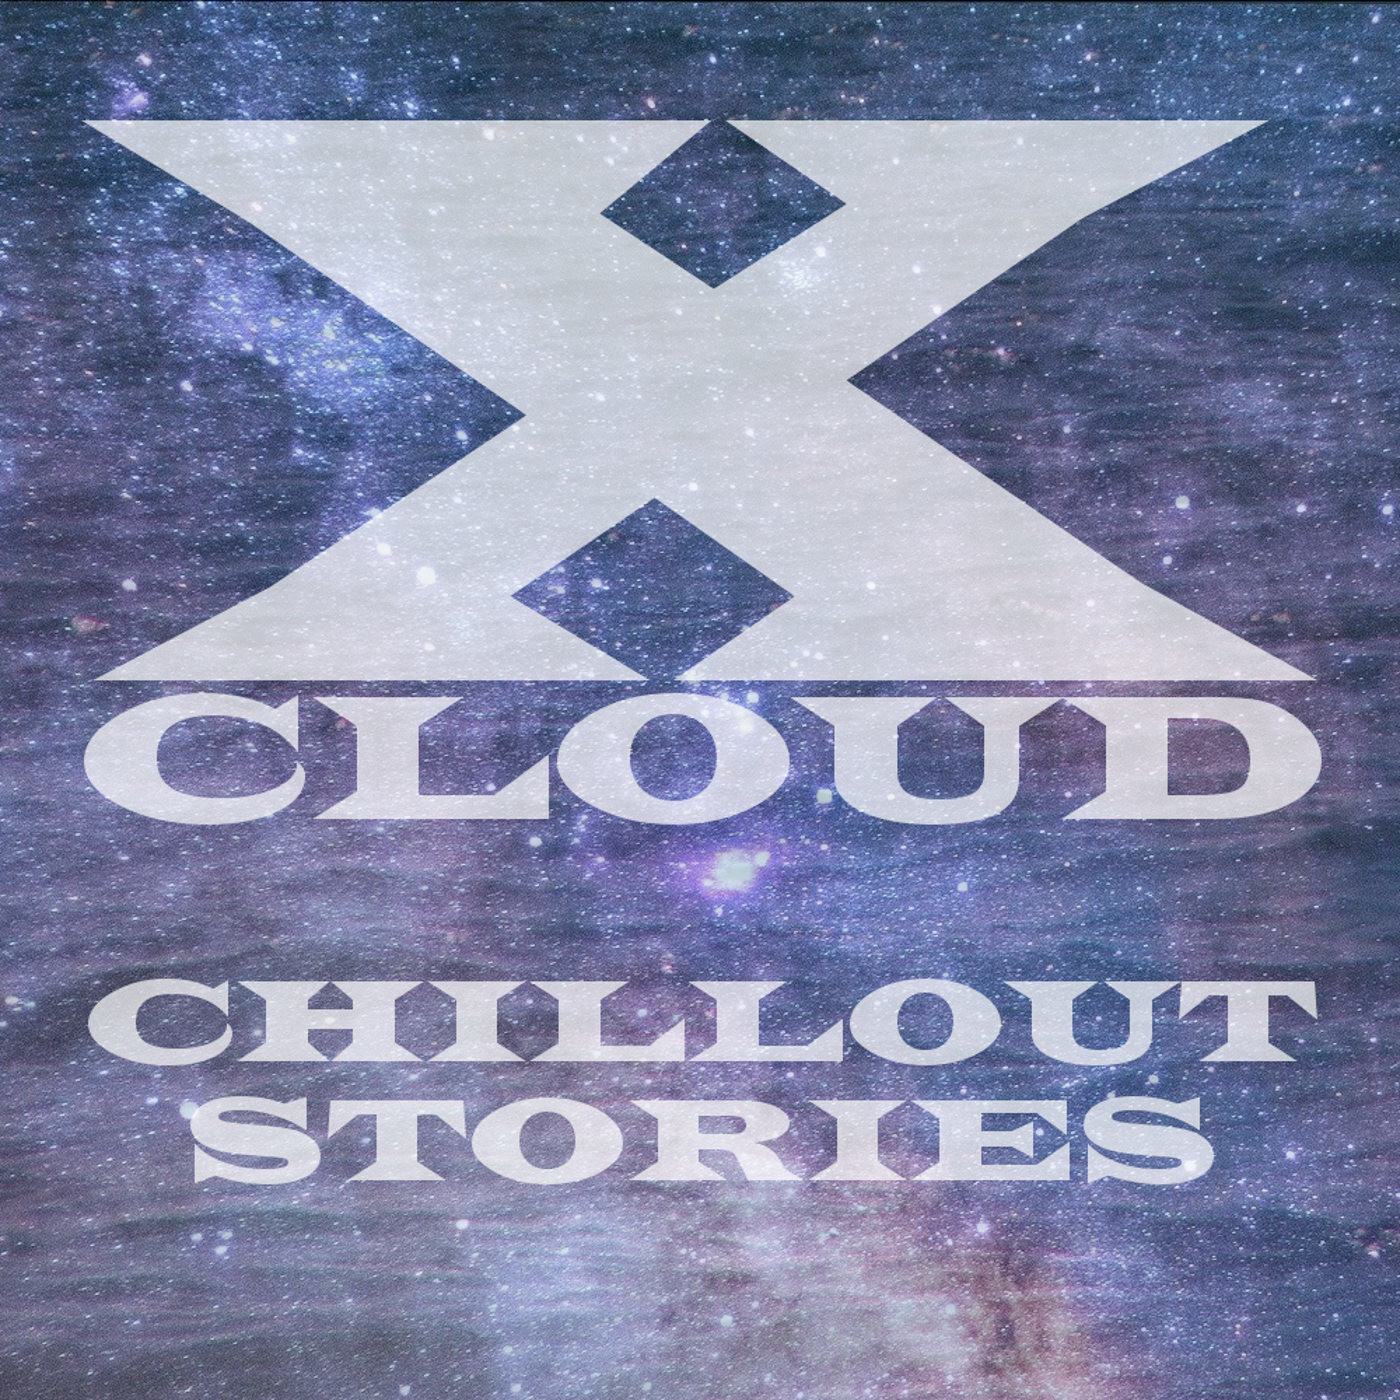 XCloud - Chillout Stories #29